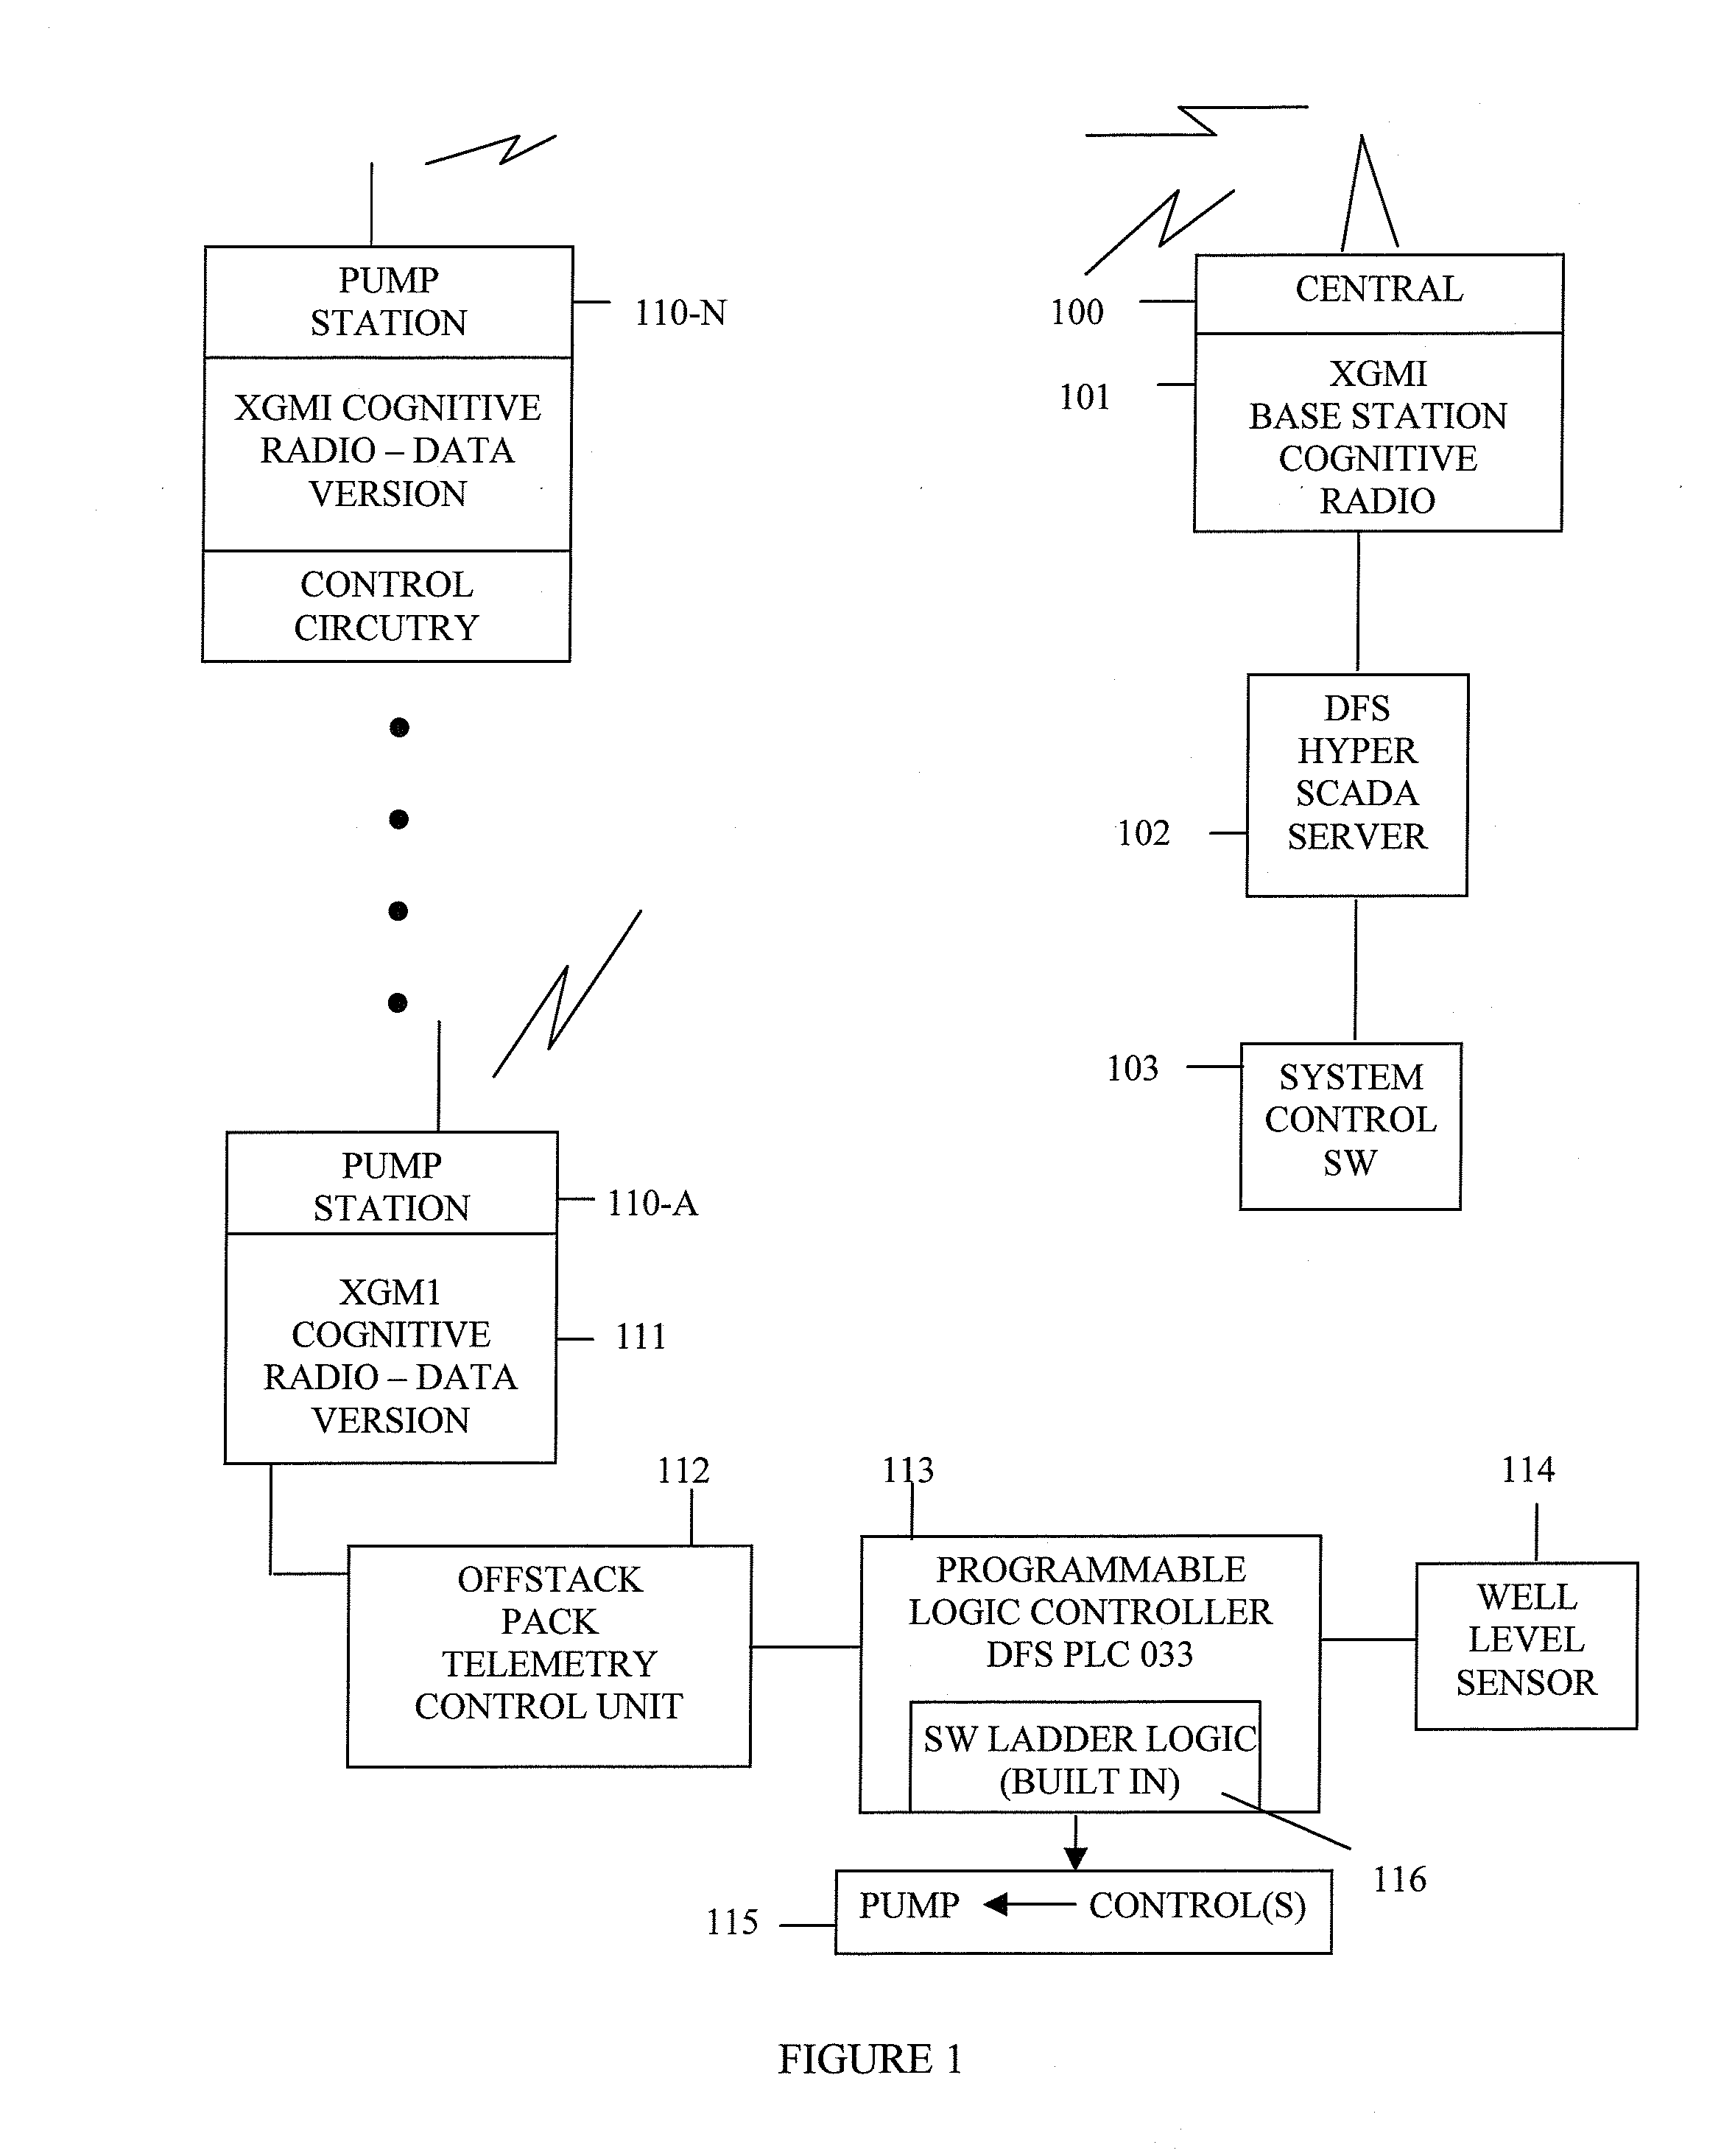 Wastewater collection flow management system and techniques